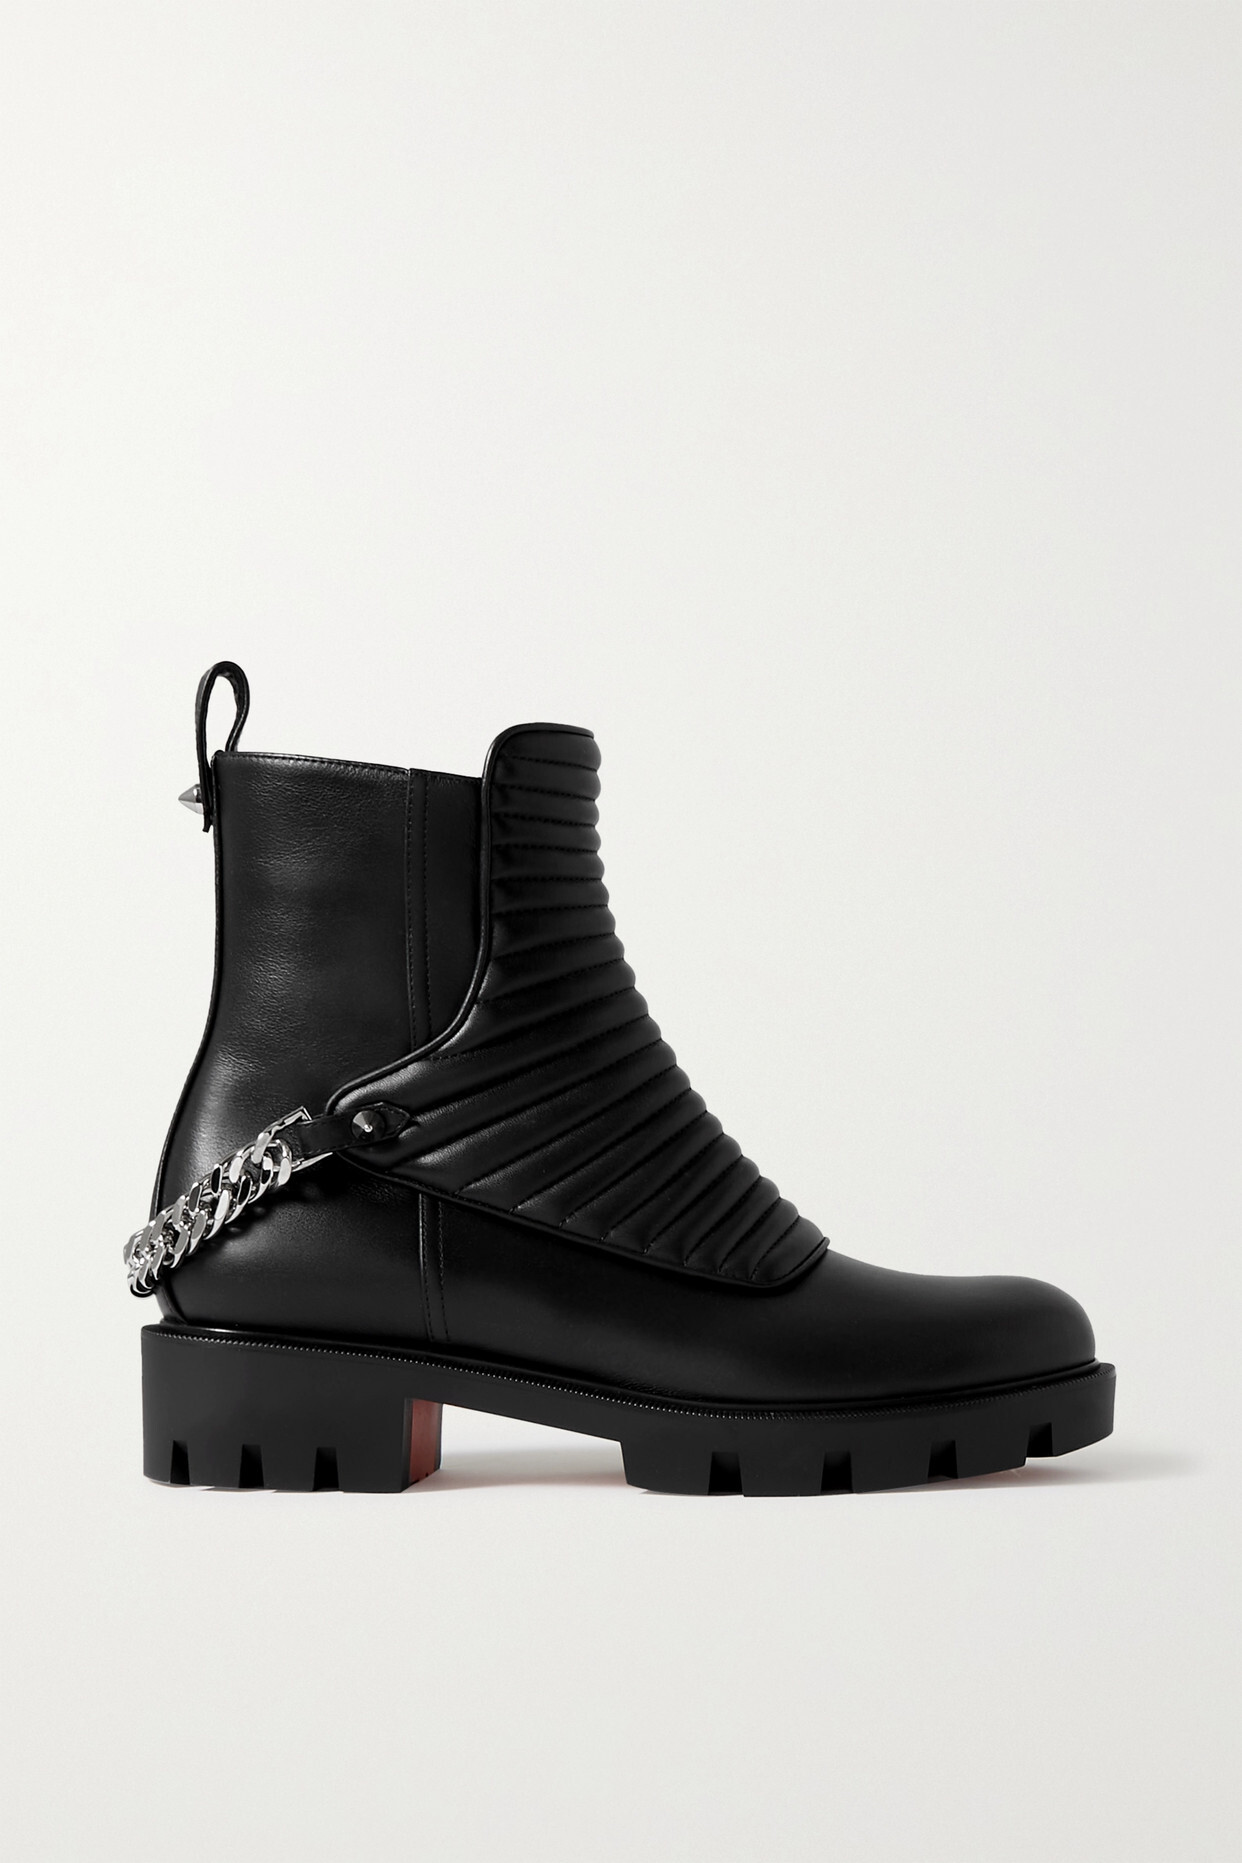 Christian Louboutin - Maddic Max Chain-embellished Quilted Leather Ankle Boots - Black